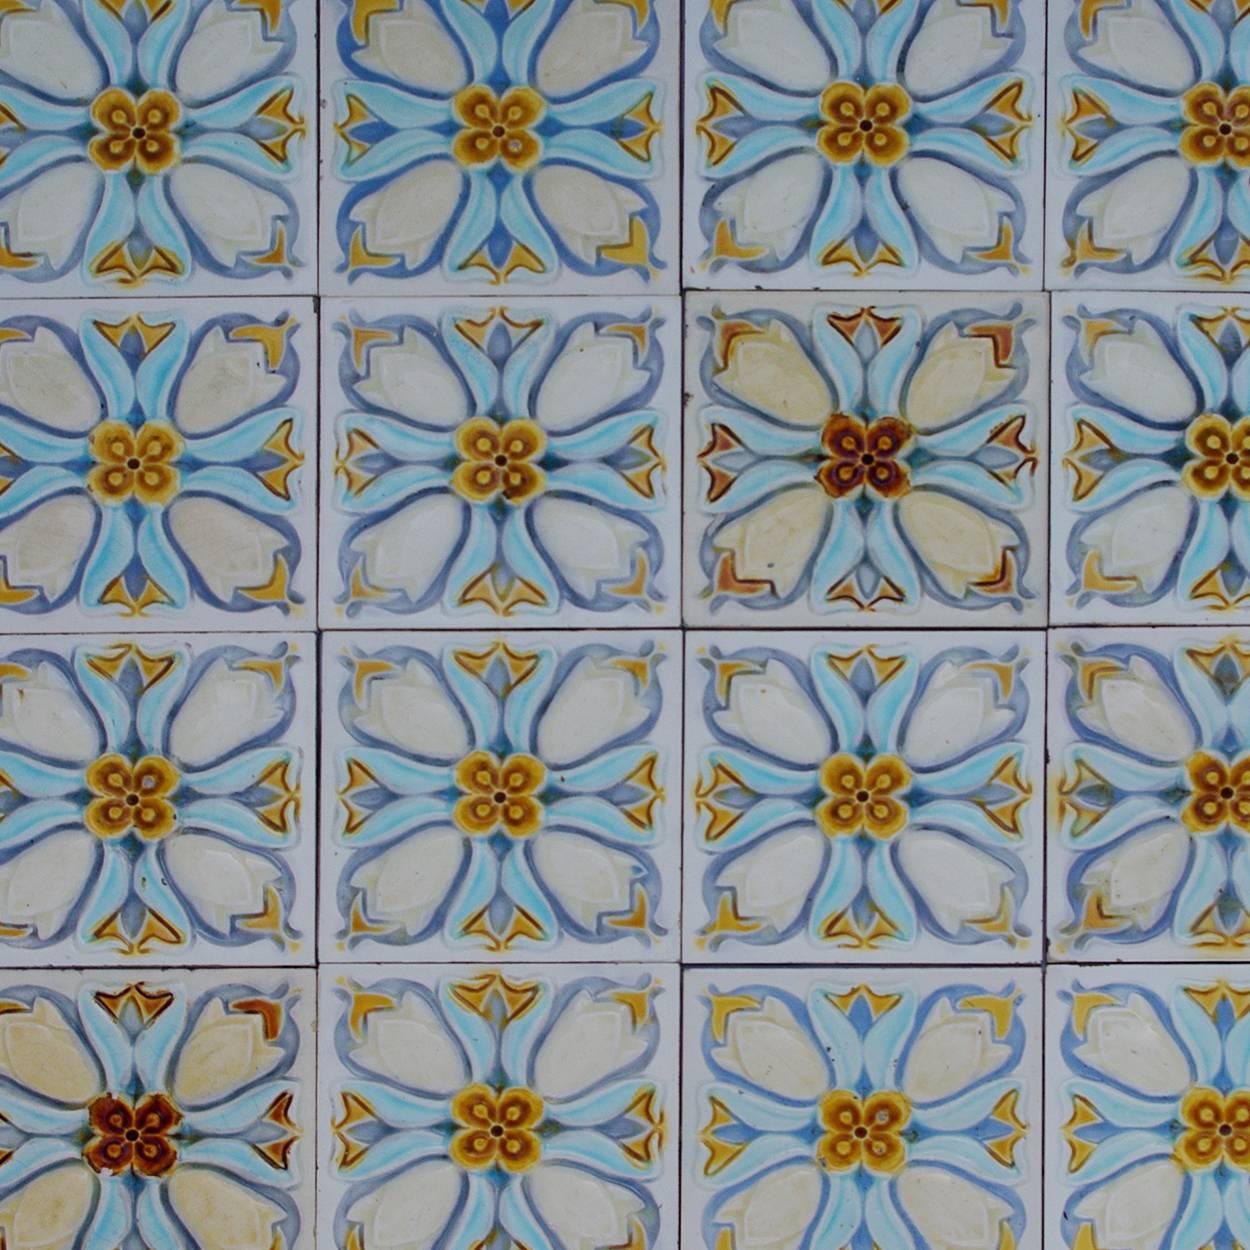 Sunning Art Deco tile panel from the superb firm, Gilliot, Heminksen, circa 1930, this quantity original Jugenstil tiles by Craven is very rare to find. With beautiful crackle.

Size each tile: 6 inches (15.2cm) width x 6 inches (15.2 cm) Height x